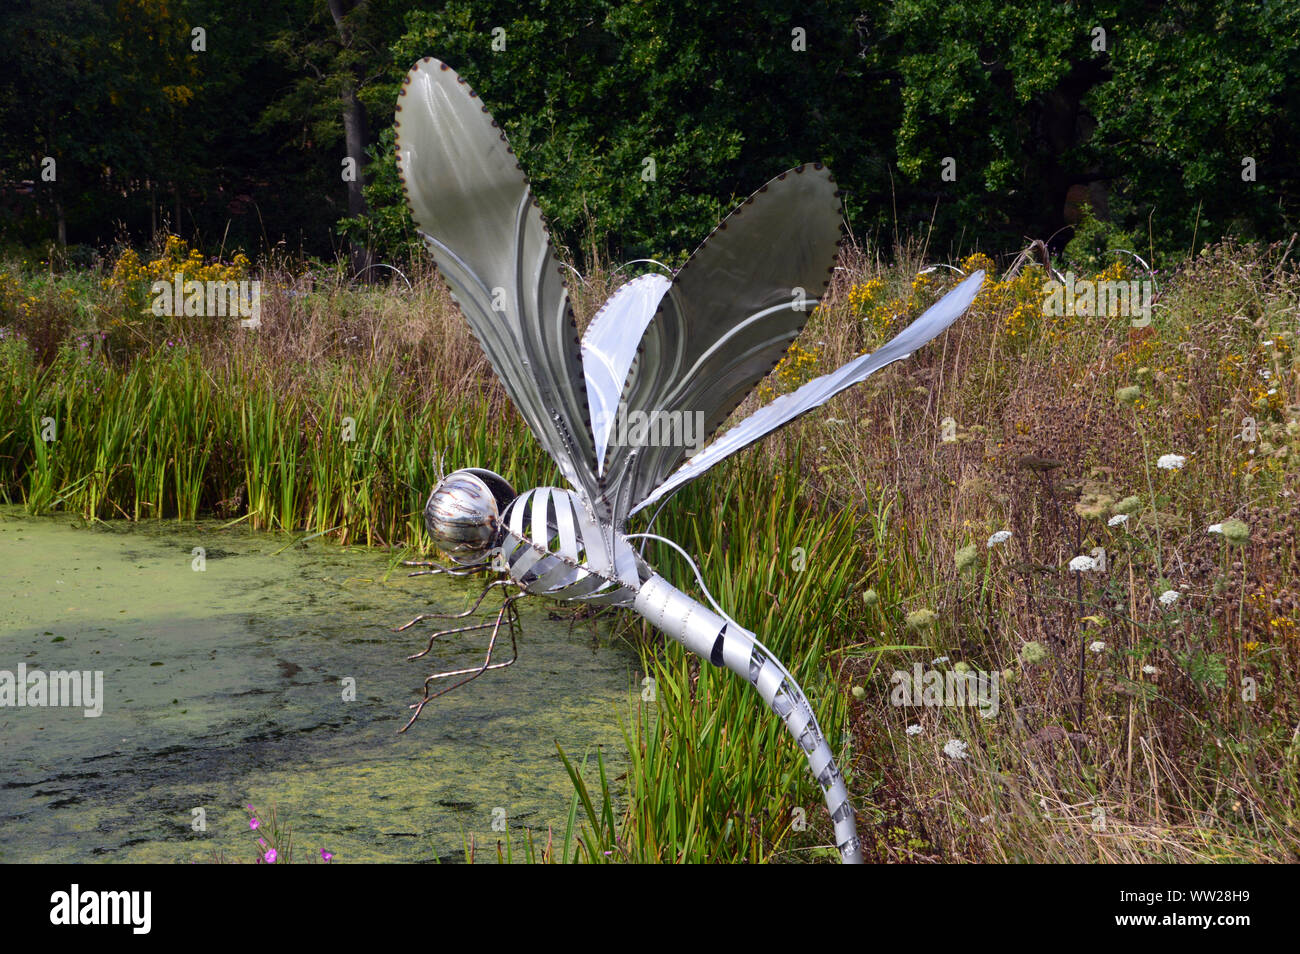 Sliver Metal Dragonfly Sculpture Flying over the Queen Mother's Lake at RHS Garden Harlow Carr, Harrogate, Yorkshire. England, UK Stock Photo